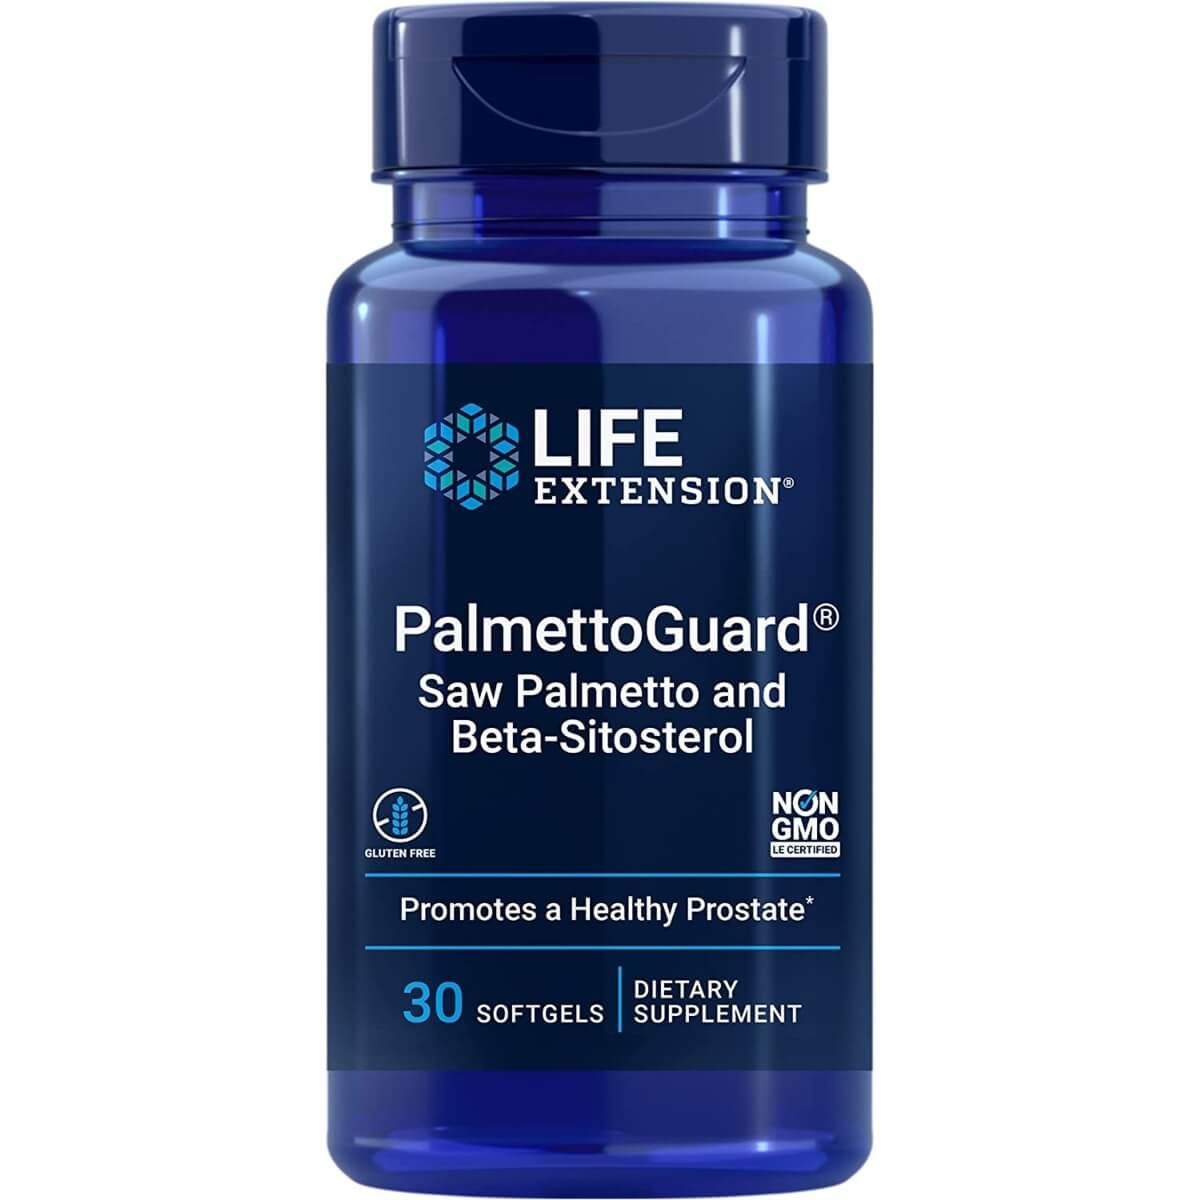 Photos - Vitamins & Minerals Life Extension PalmettoGuard Saw Palmetto and Beta-Sitosterol 30 Softgels 